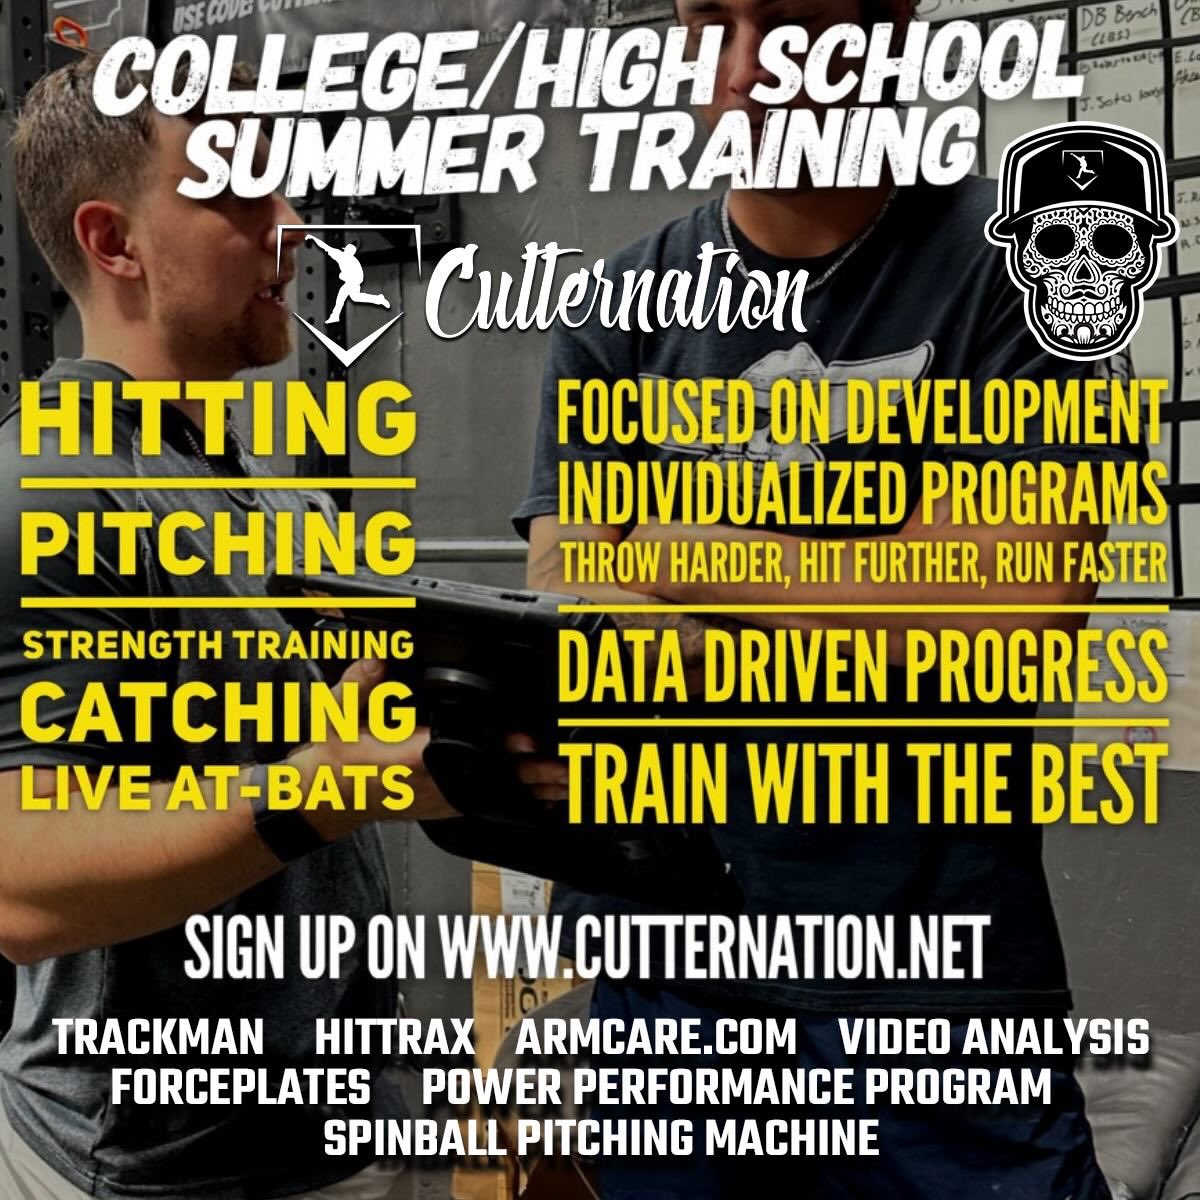 Cutternation summer training for high school and college training. Get better at your game today. Check out our training schedule morning times coming soon. cutternation.net.